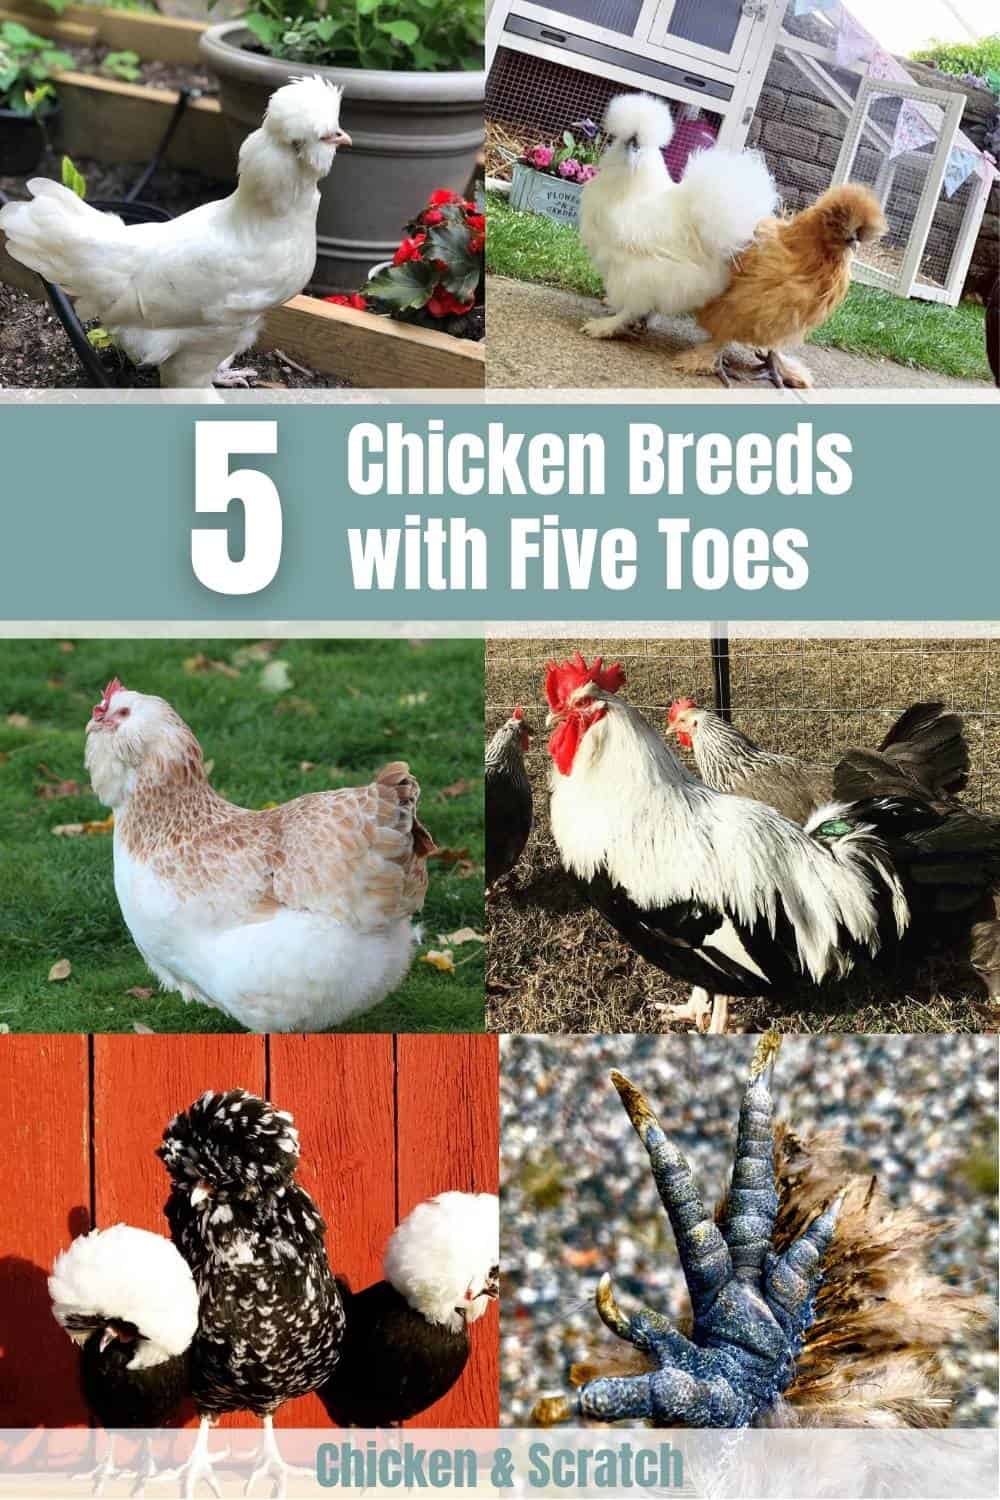 chicken breeds with 5 toes